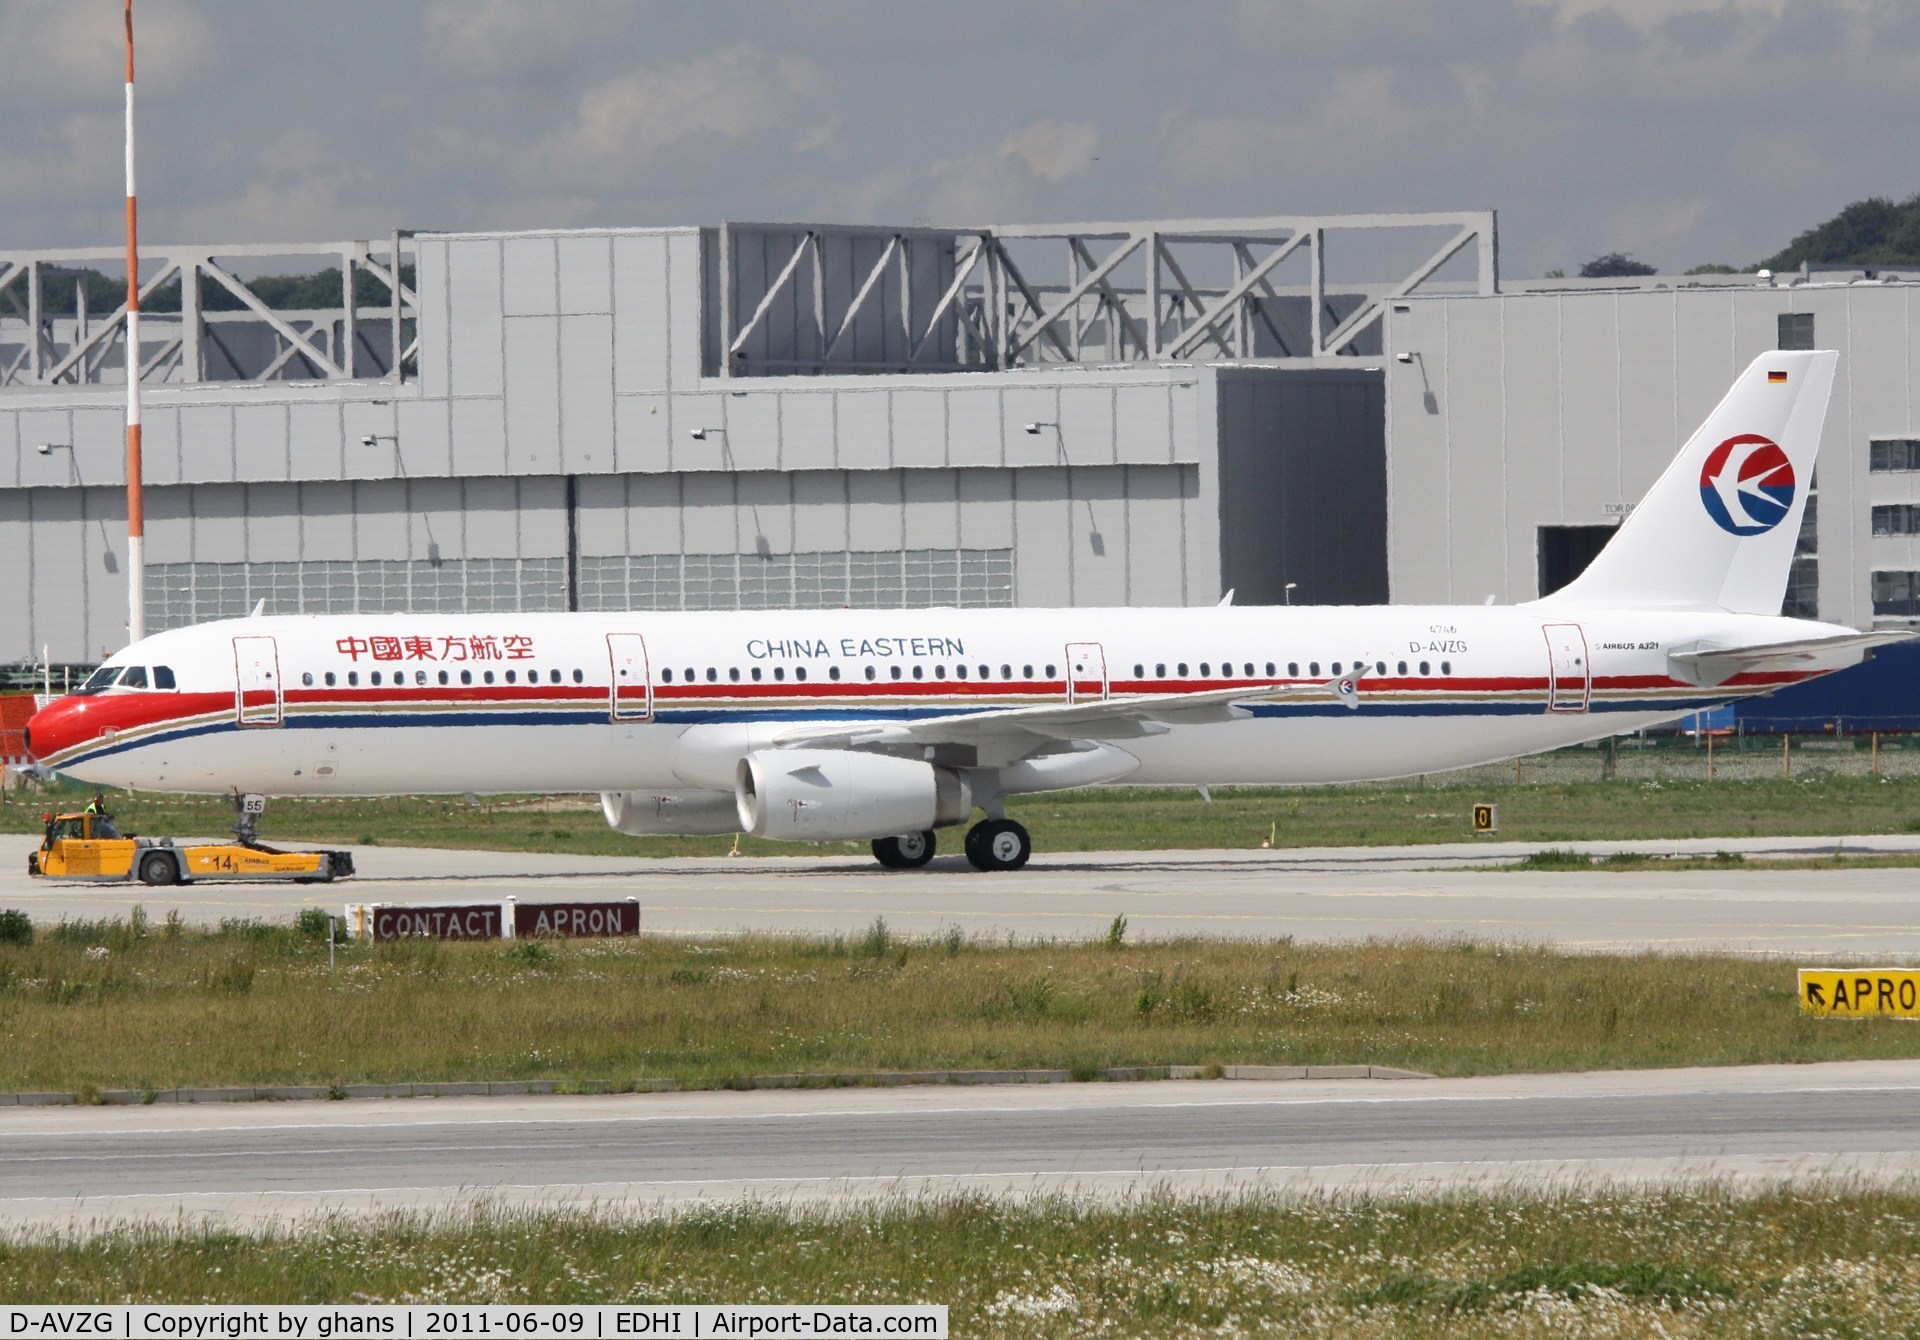 D-AVZG, 2011 Airbus A321-213 C/N 4746, to become B-6755